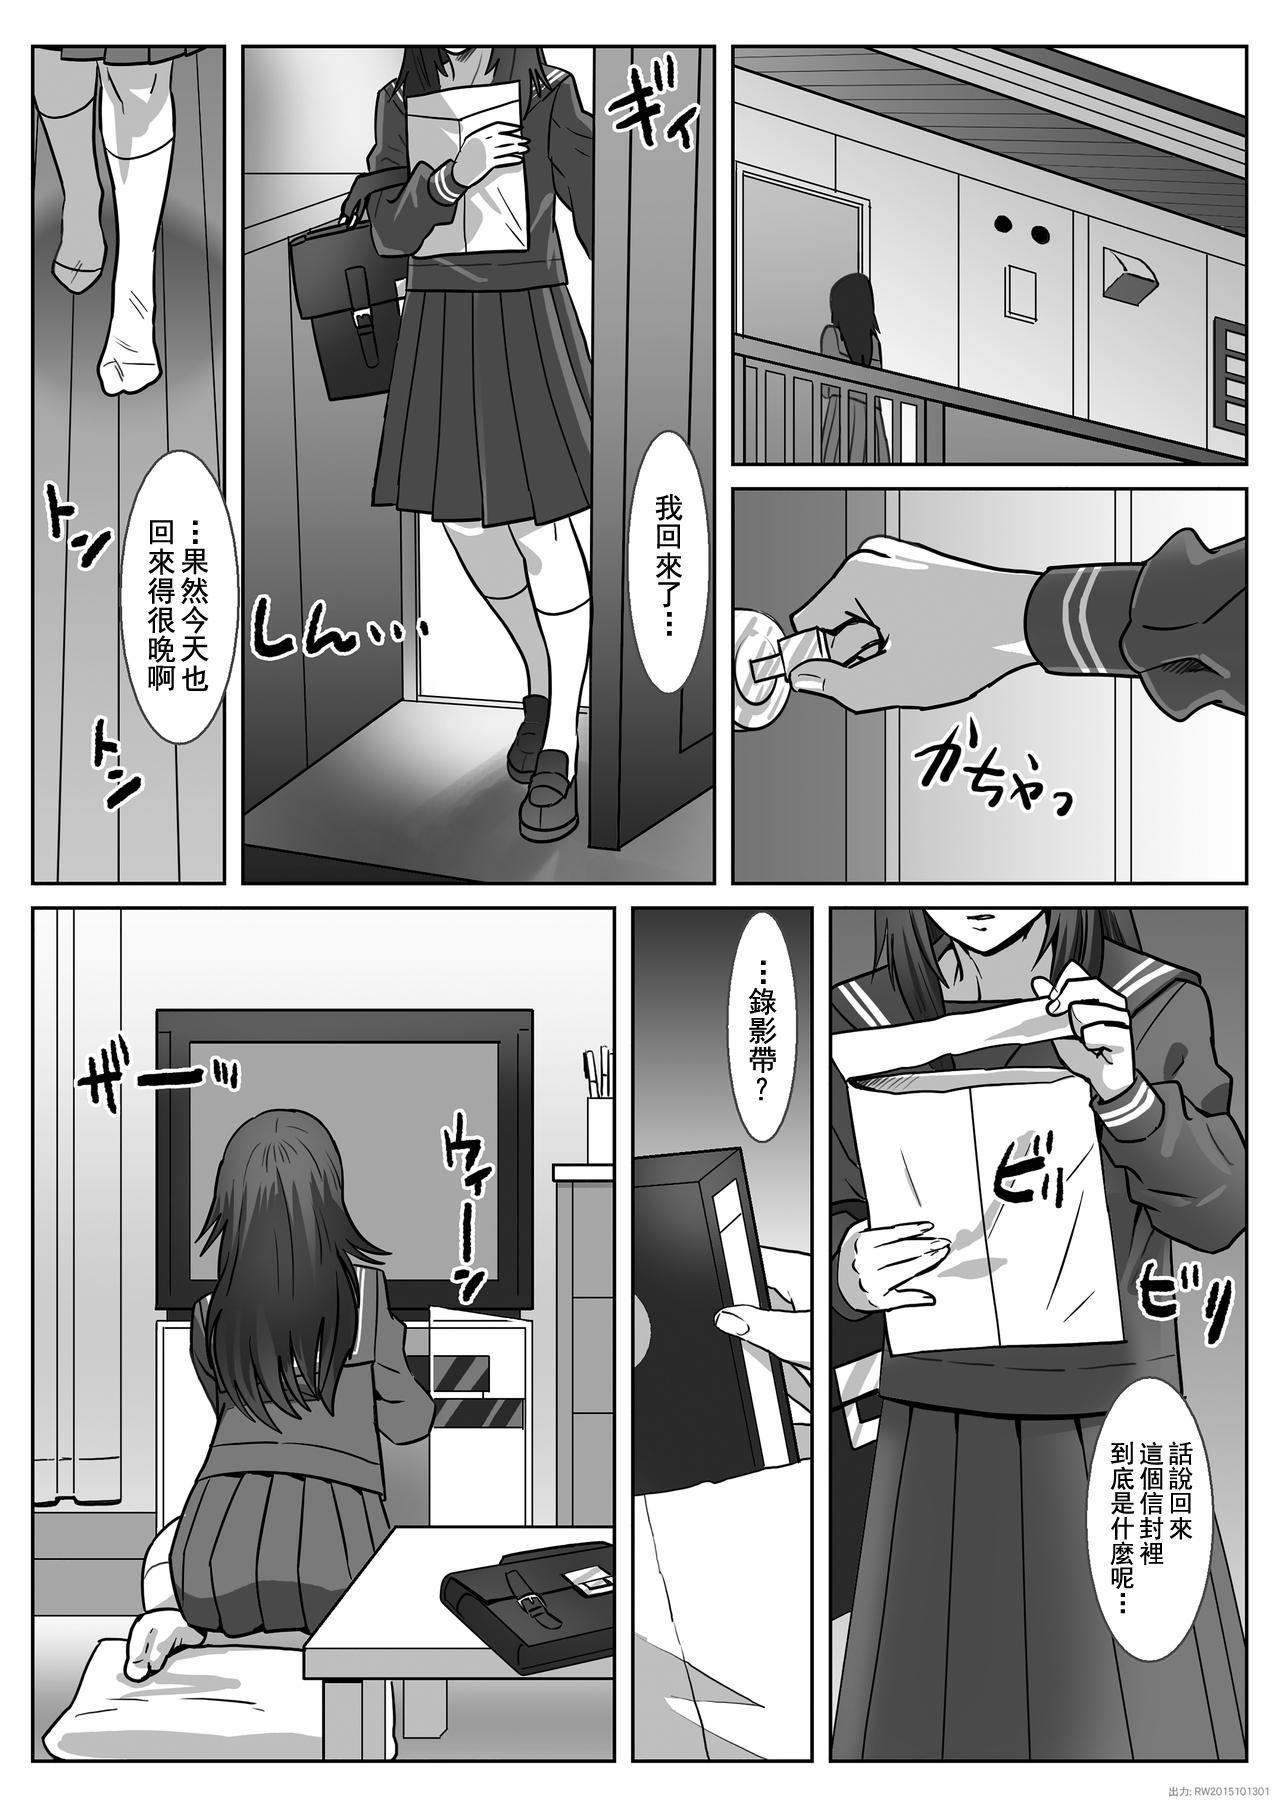 Thick [Remora Works] FUTACOLO CO -INHERITANCE- VOL.001 [Chinese] [无毒汉化组] - Original Pounded - Page 2